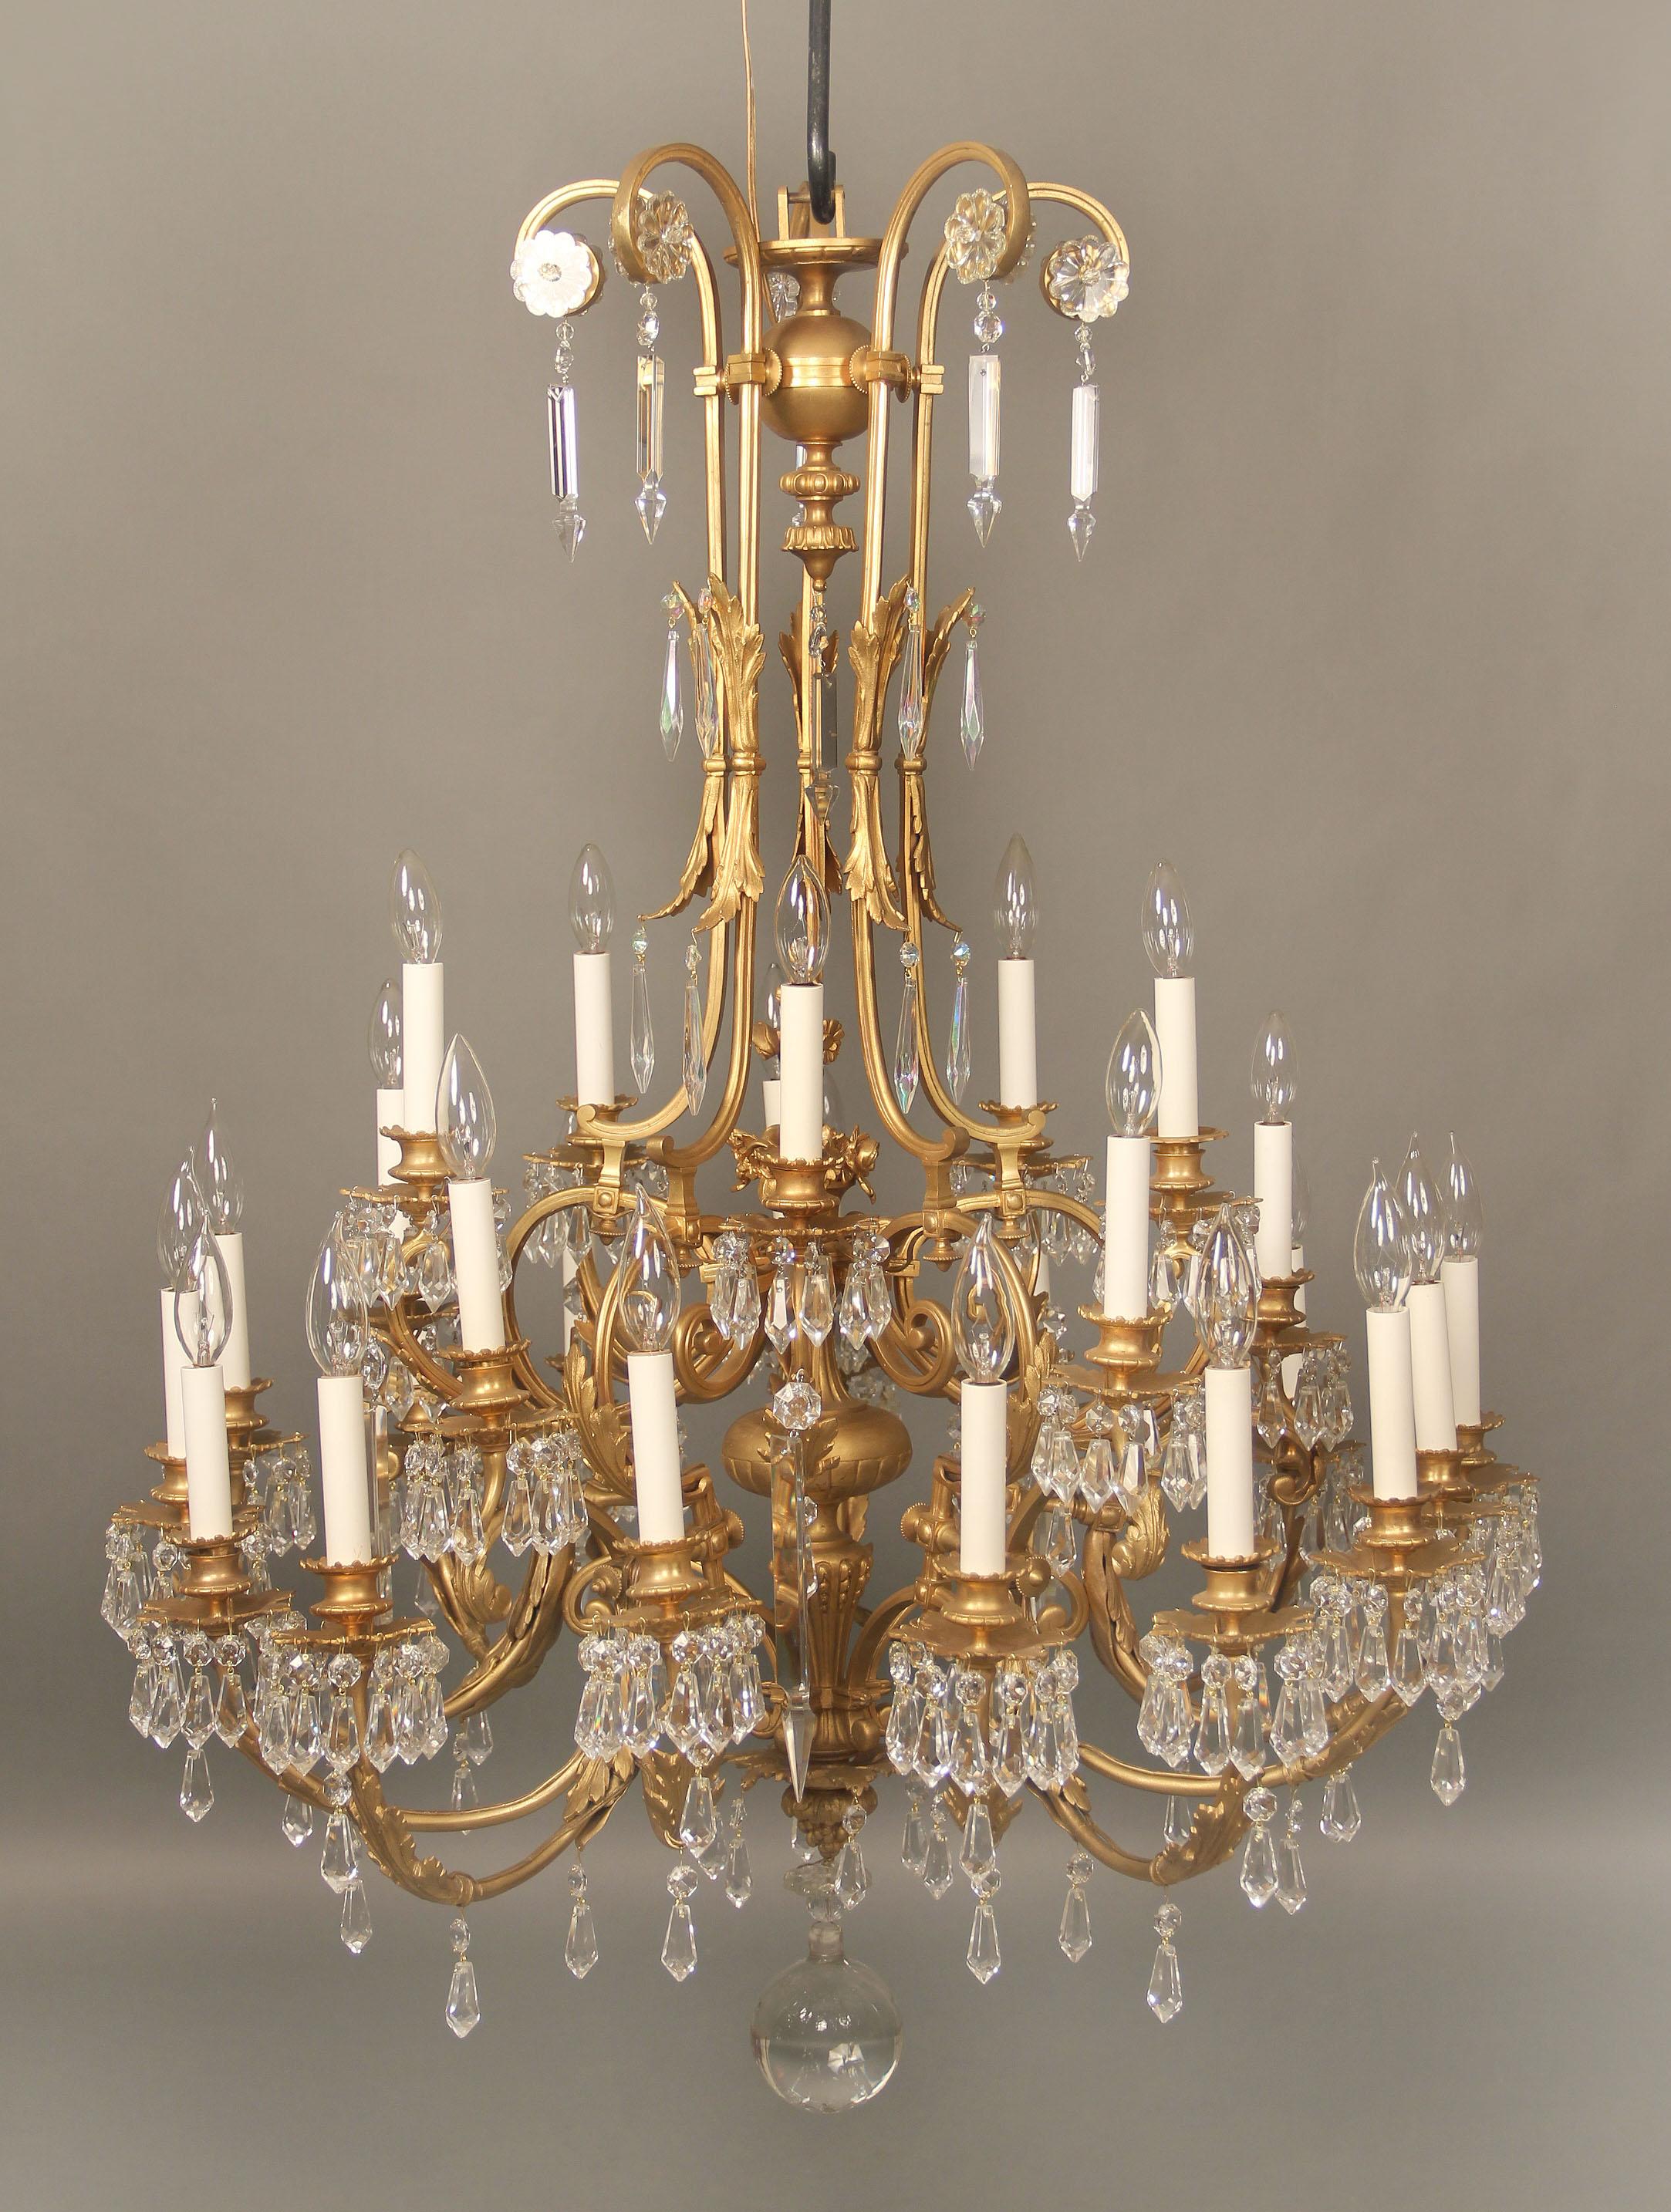 A fine early 20th century gilt bronze and drop crystal twenty-five-light chandelier

Numerous shaped drop crystal along the arms and cups, bronze floral central design, twenty five tiered perimeter lights.